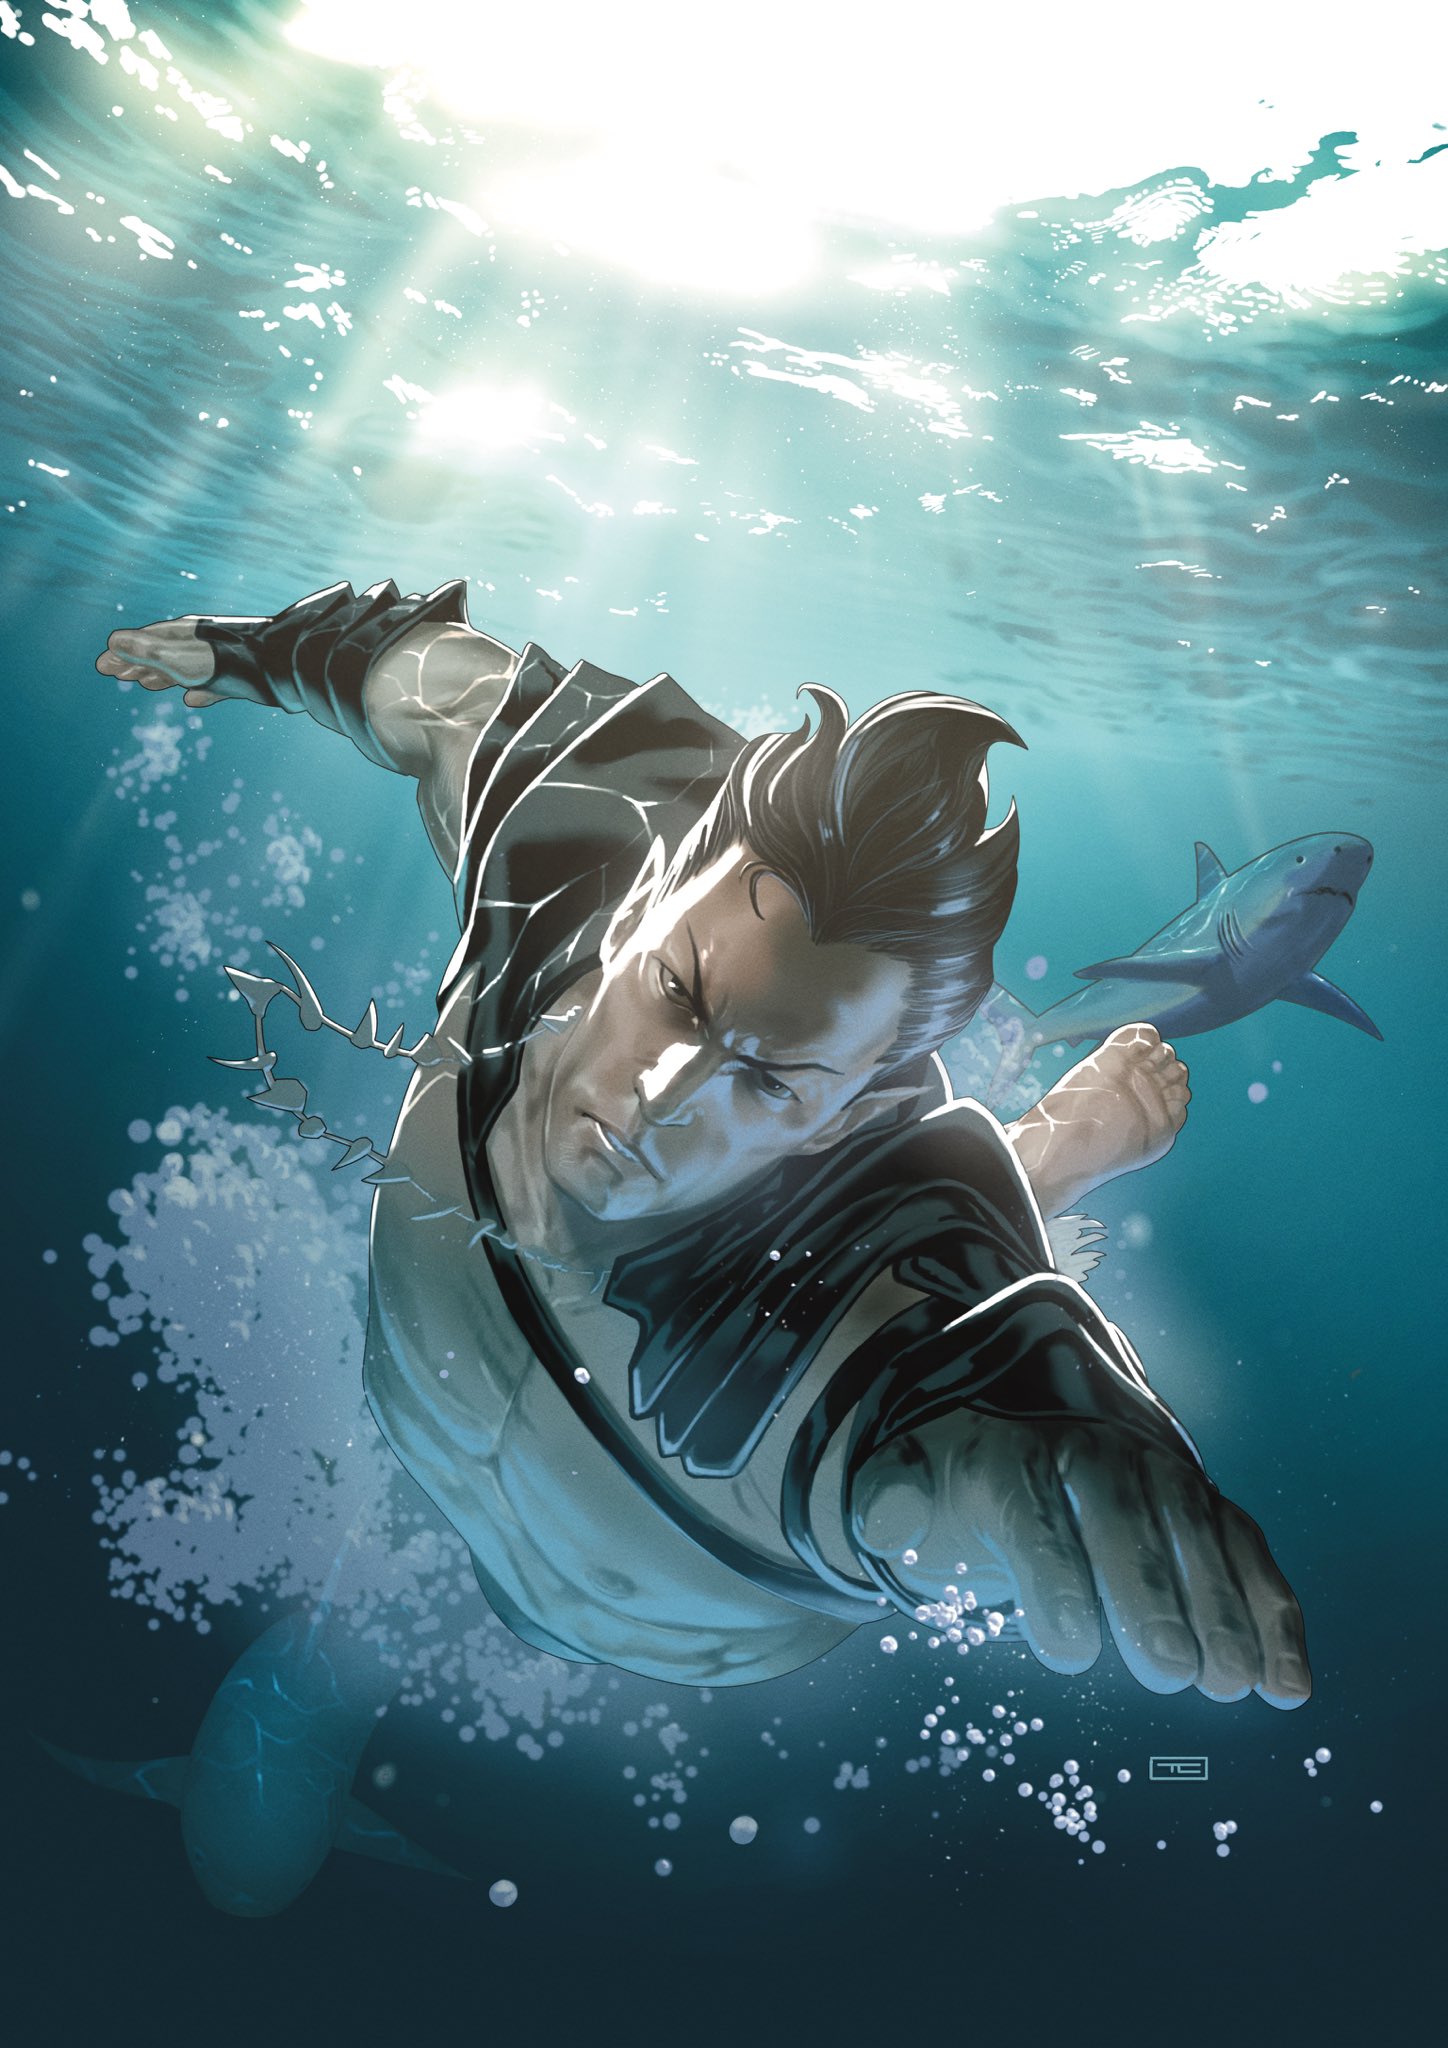 https://static.wikia.nocookie.net/marveldatabase/images/f/f1/Namor_Conquered_Shores_Vol_1_1_Clarke_Variant_Textless.jpg/revision/latest?cb=20220718073333